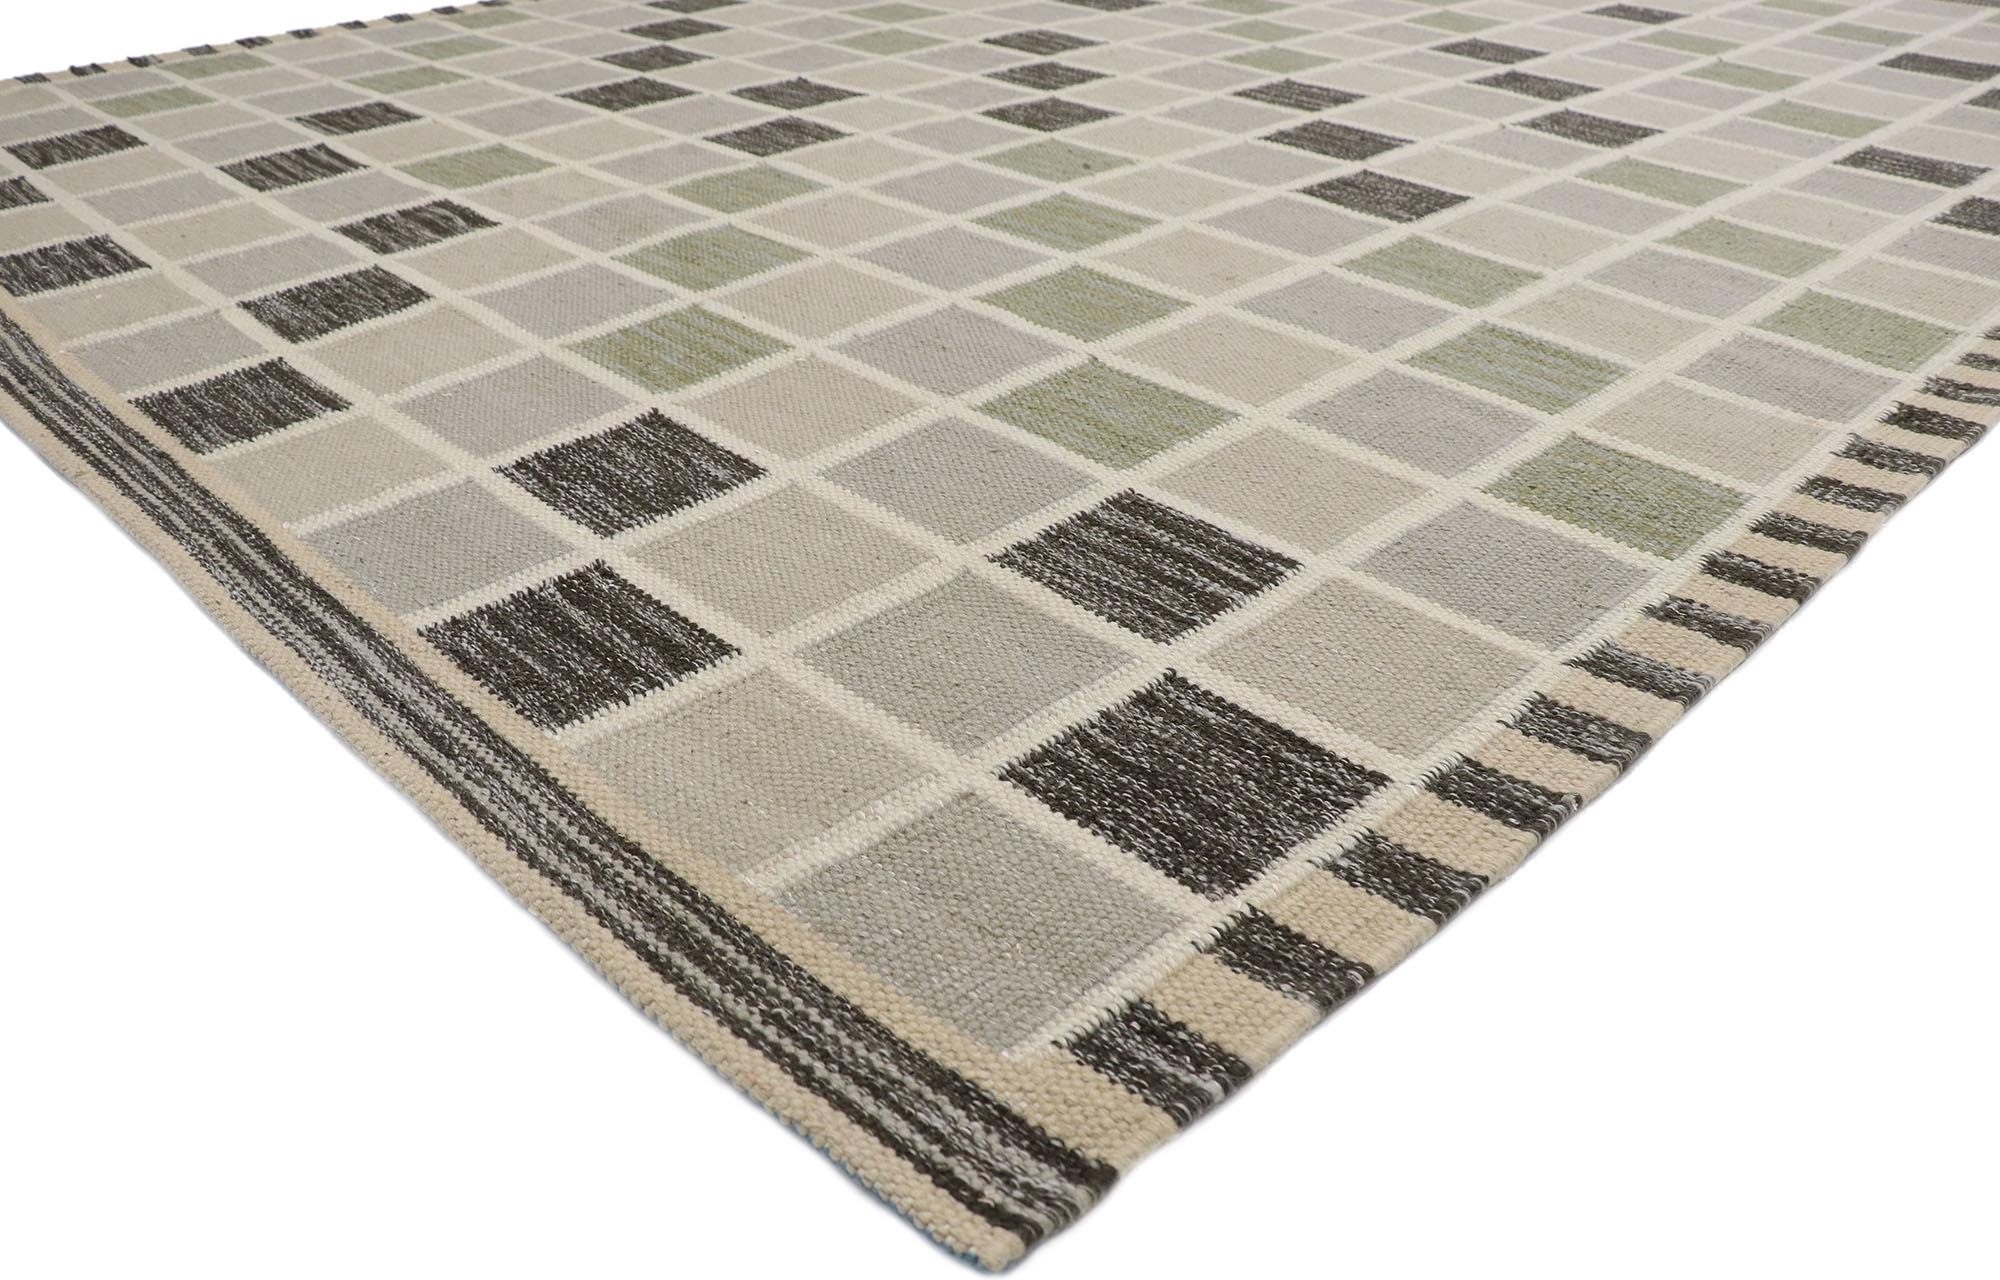 30664, new Swedish Inspired Kilim rug with Scandinavian Modern style. With its simplicity, geometric design and neutral color, this hand-woven wool Swedish Indian Kilim rug provides a feeling of cozy contentment without the clutter. The abrashed